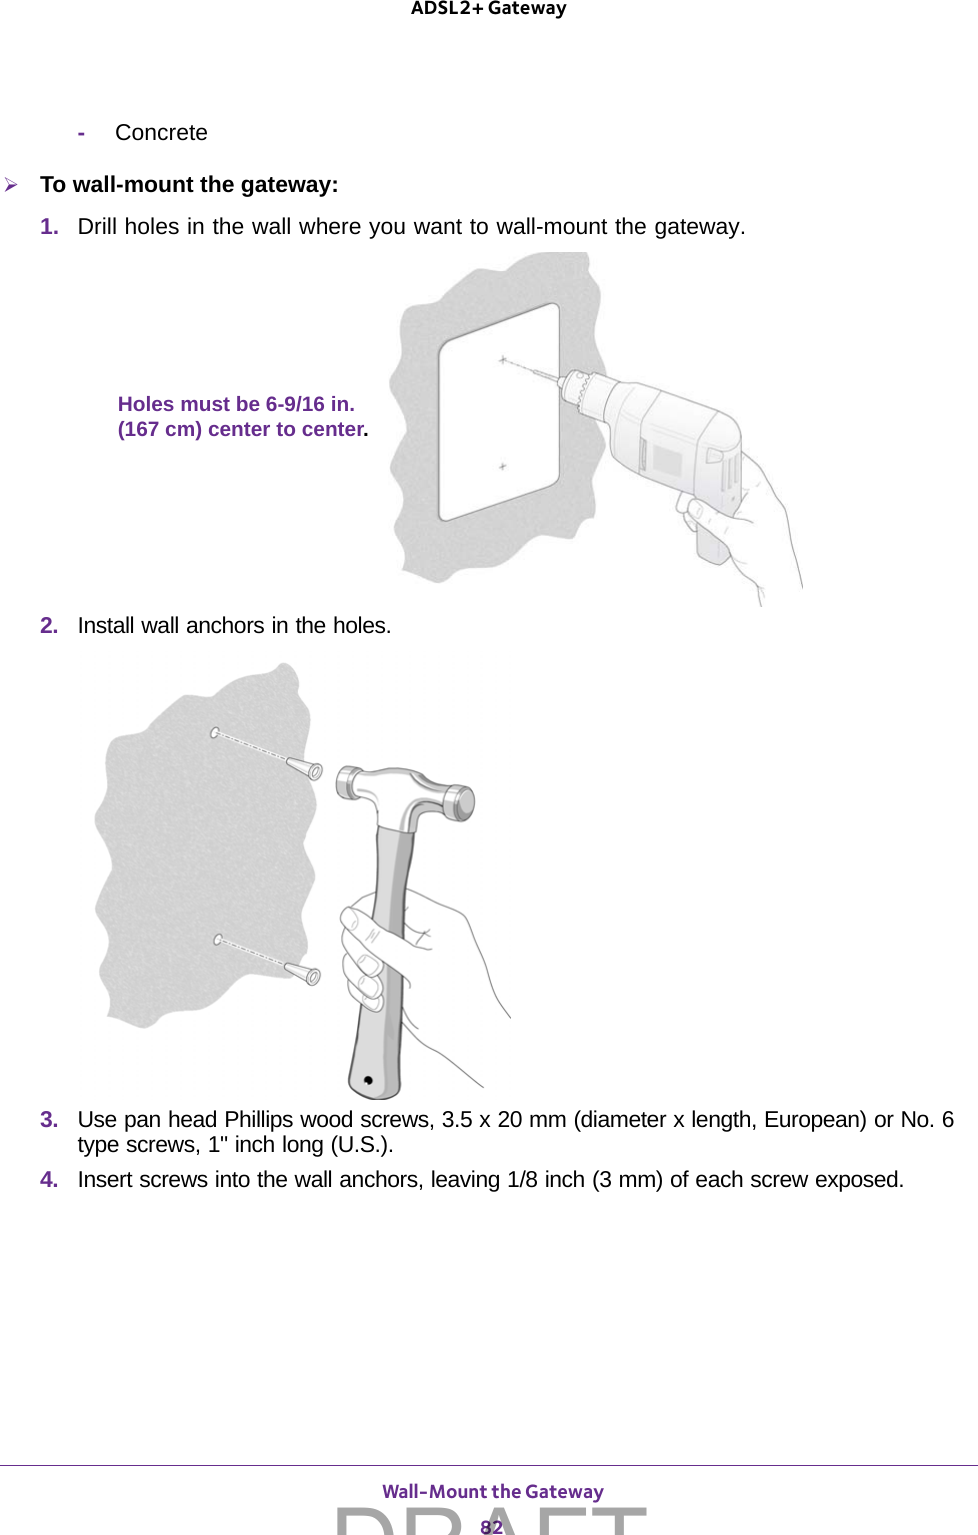  Wall-Mount the Gateway82ADSL2+ Gateway -ConcreteTo wall-mount the gateway: 1.  Drill holes in the wall where you want to wall-mount the gateway. Holes must be 6-9/16 in.(167 cm) center to center.2.  Install wall anchors in the holes.3.  Use pan head Phillips wood screws, 3.5 x 20 mm (diameter x length, European) or No. 6 type screws, 1&quot; inch long (U.S.). 4.  Insert screws into the wall anchors, leaving 1/8 inch (3 mm) of each screw exposed.DRAFT